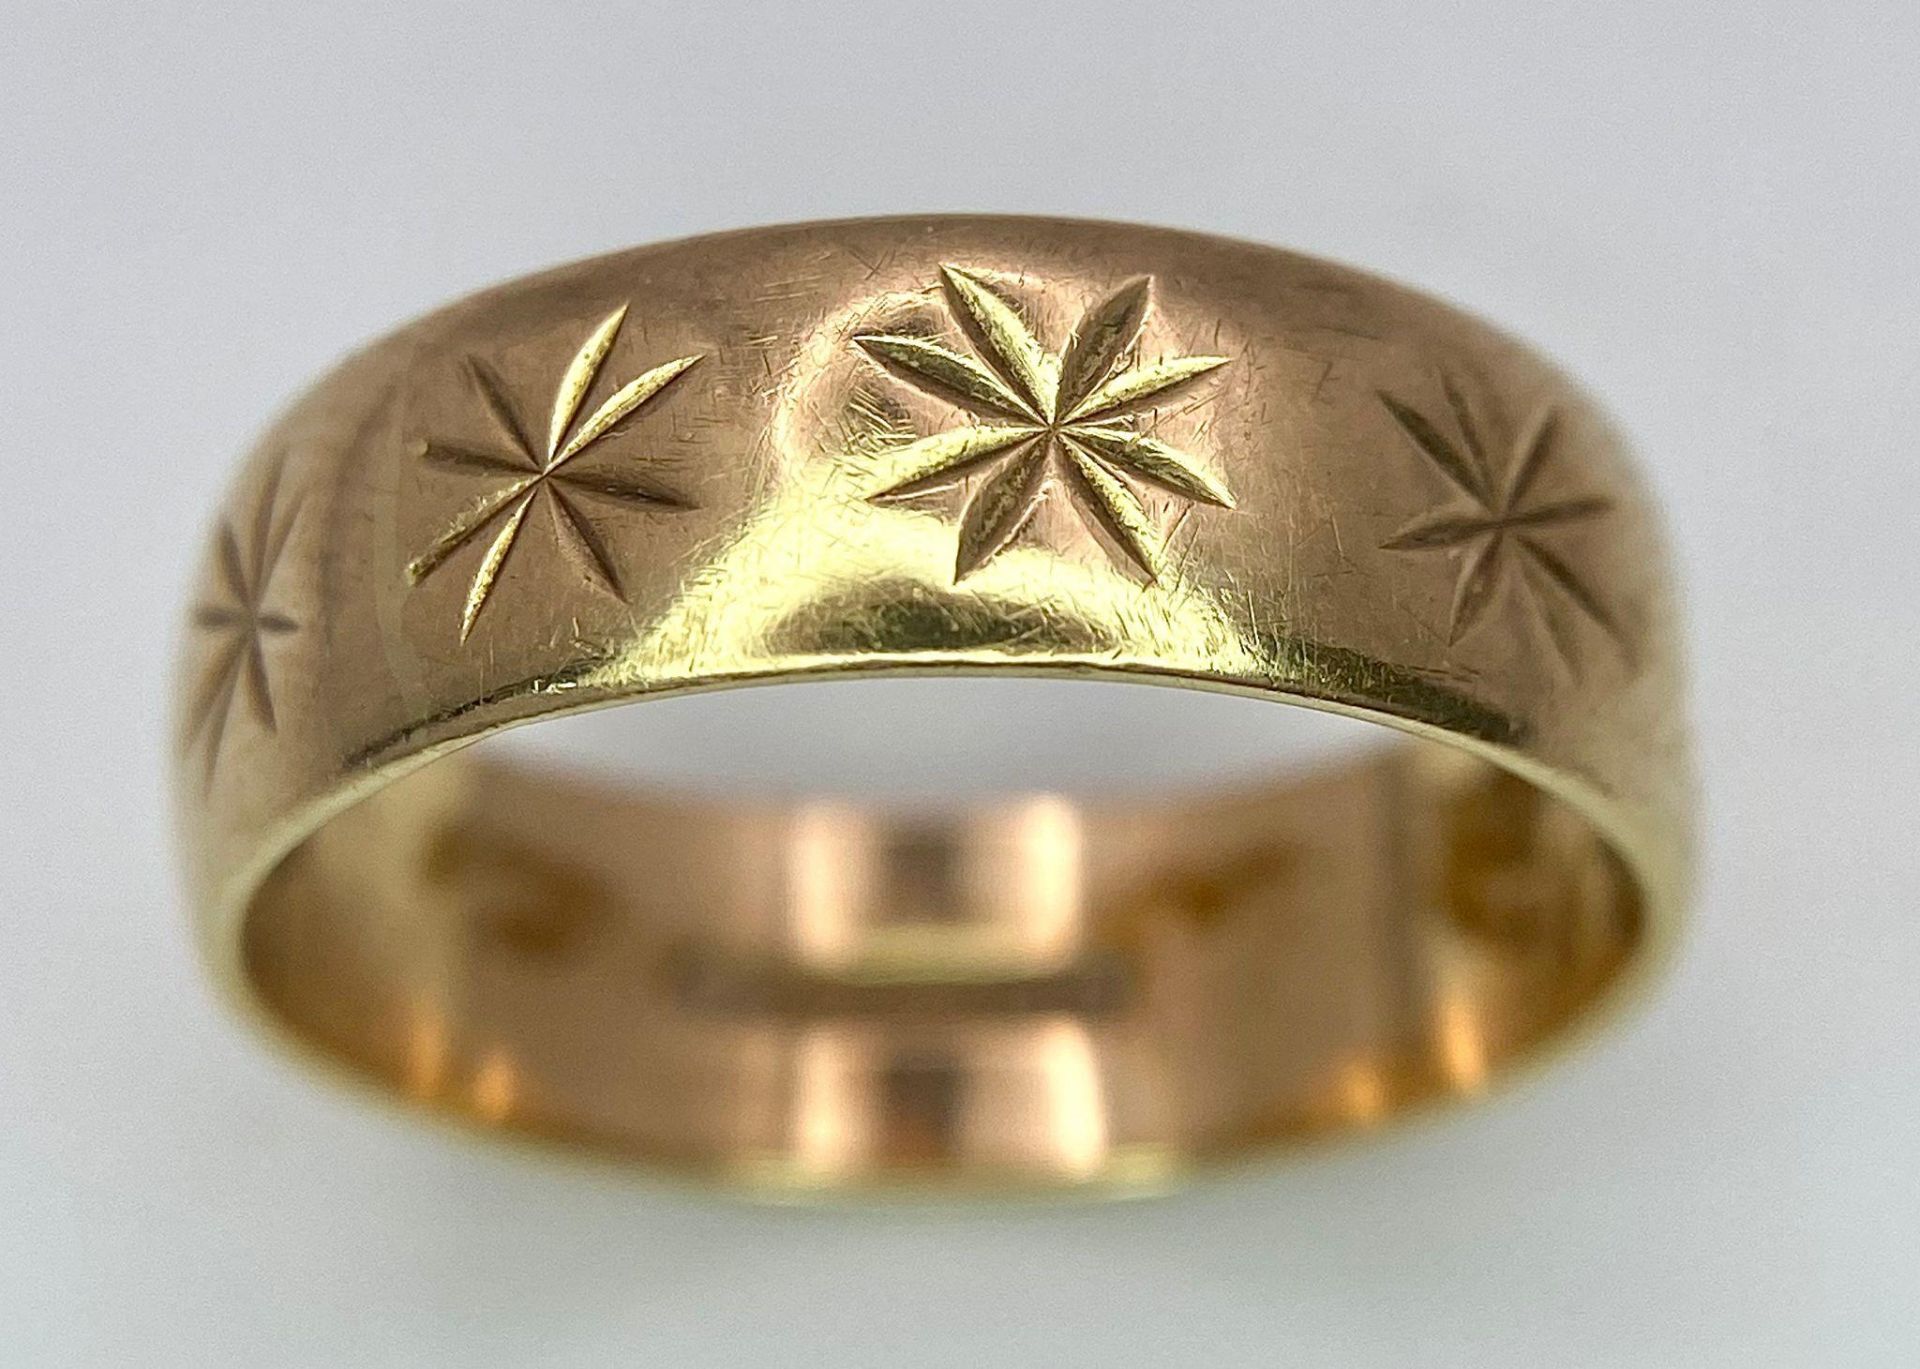 A Vintage 9K Yellow Gold Band Ring with Star Decoration. 5mm width. Size M. 2.8g weight. - Bild 2 aus 6